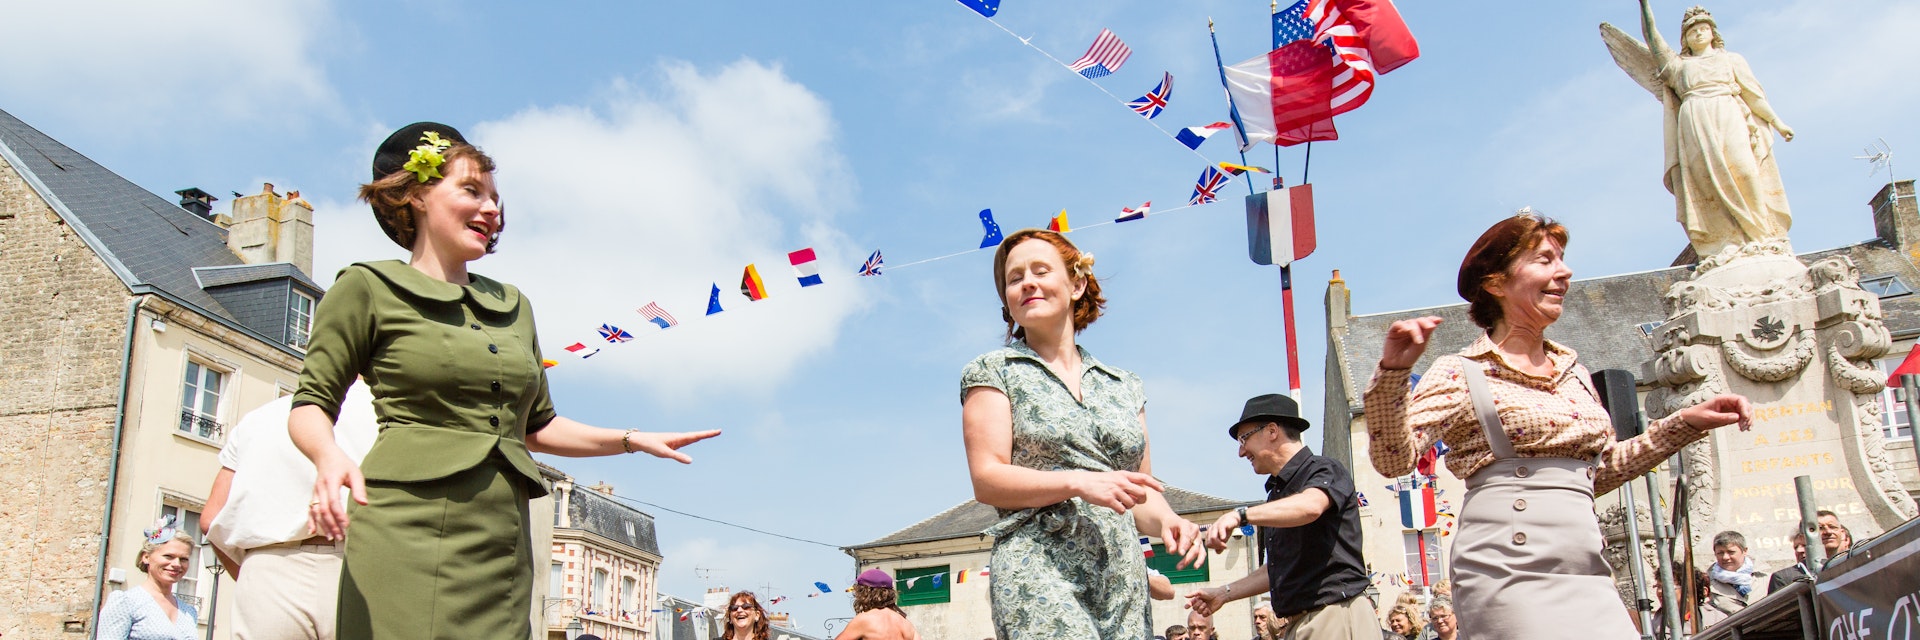 A Liberation ball in Carentan by the dancers of the “Flying cool cats” troupe.